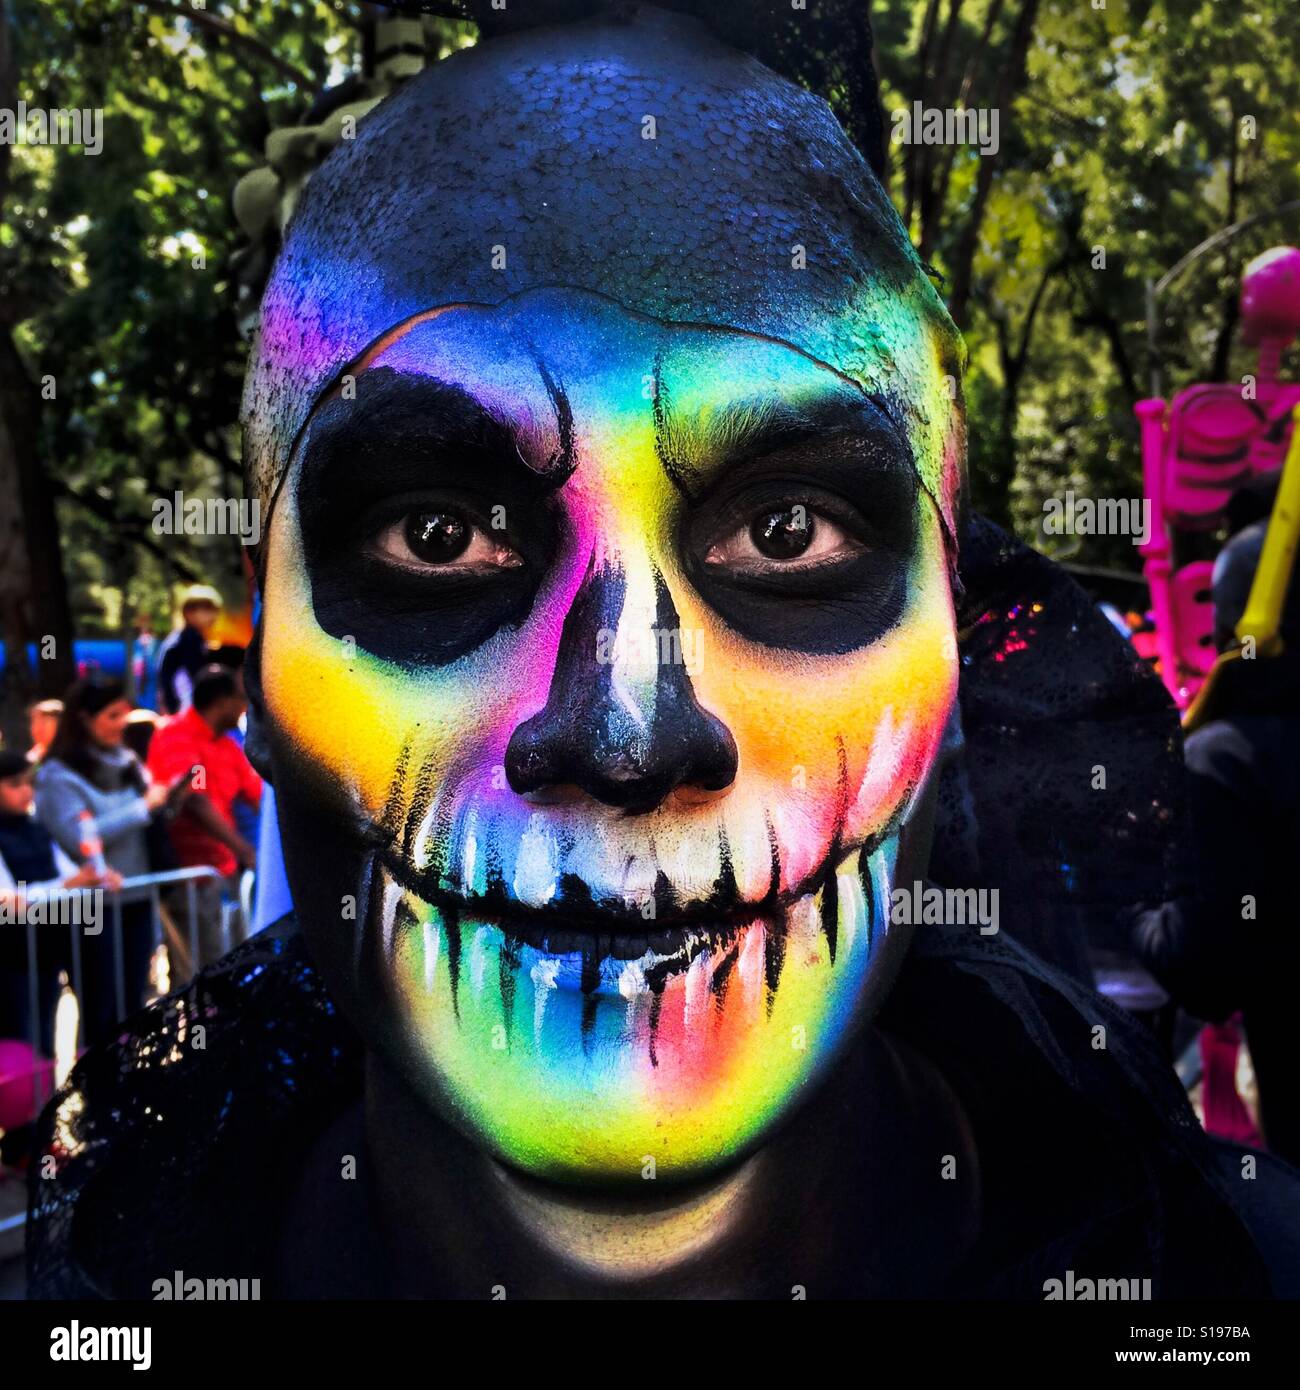 A young man, representing a Mexican cultural icon called La Catrina, takes  a part in celebrations of the Day of the Dead (Día de Muertos) in Mexico  City, Mexico, 29 October 2016